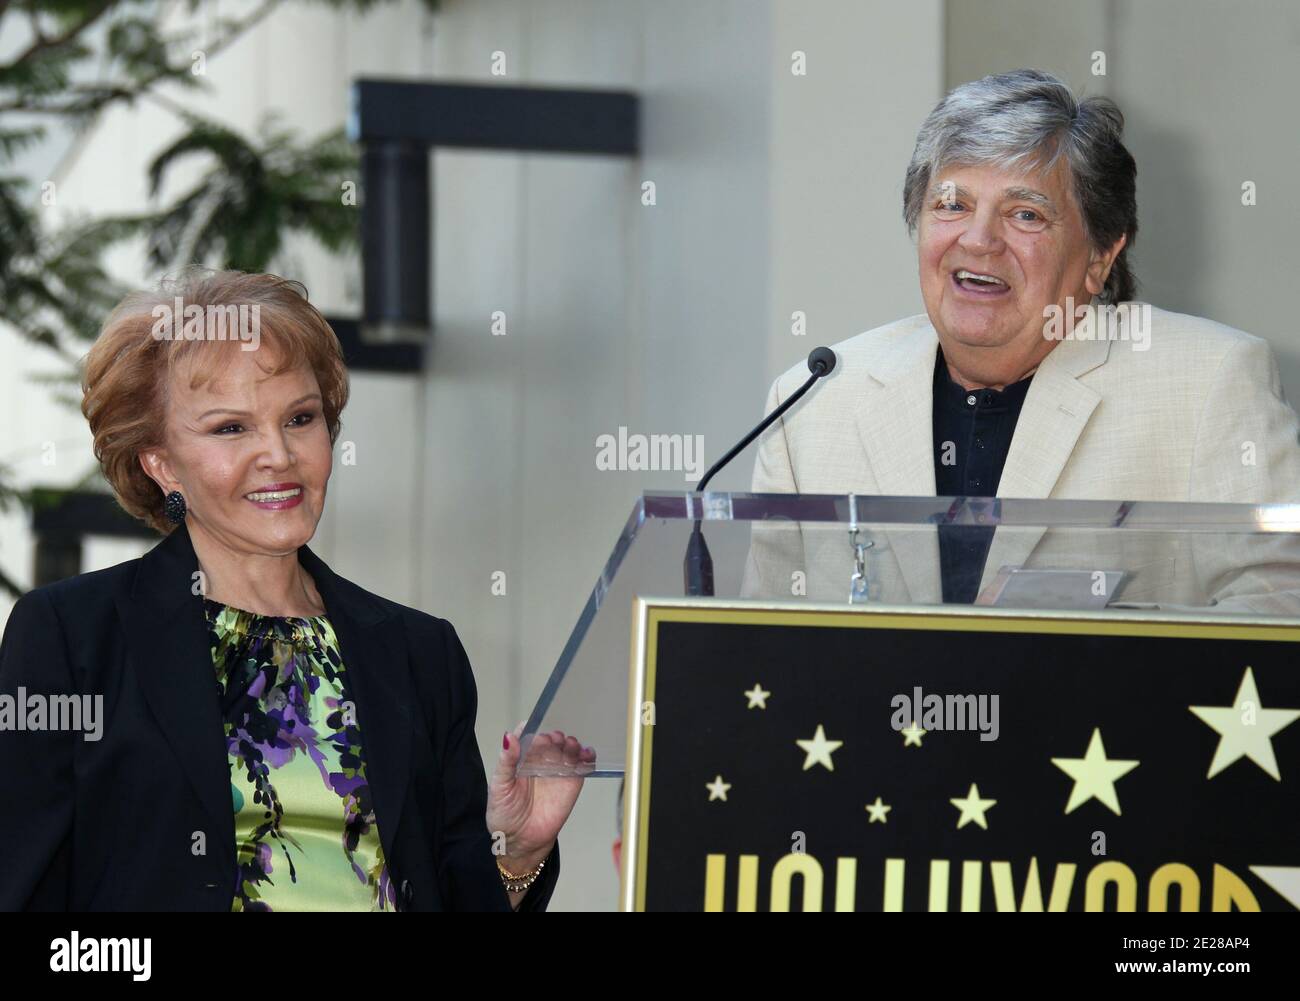 Maria Elena Holly, Phil Everley as Buddy Holly is honored on the Hollywood Walk of Fame in front of the Capital Records Building, Hollywood, California. September 7, 2011. (Pictured: Maria Elena Holly, Phil Everley). Photo by Baxter/ABACAPRESS.COM Stock Photo